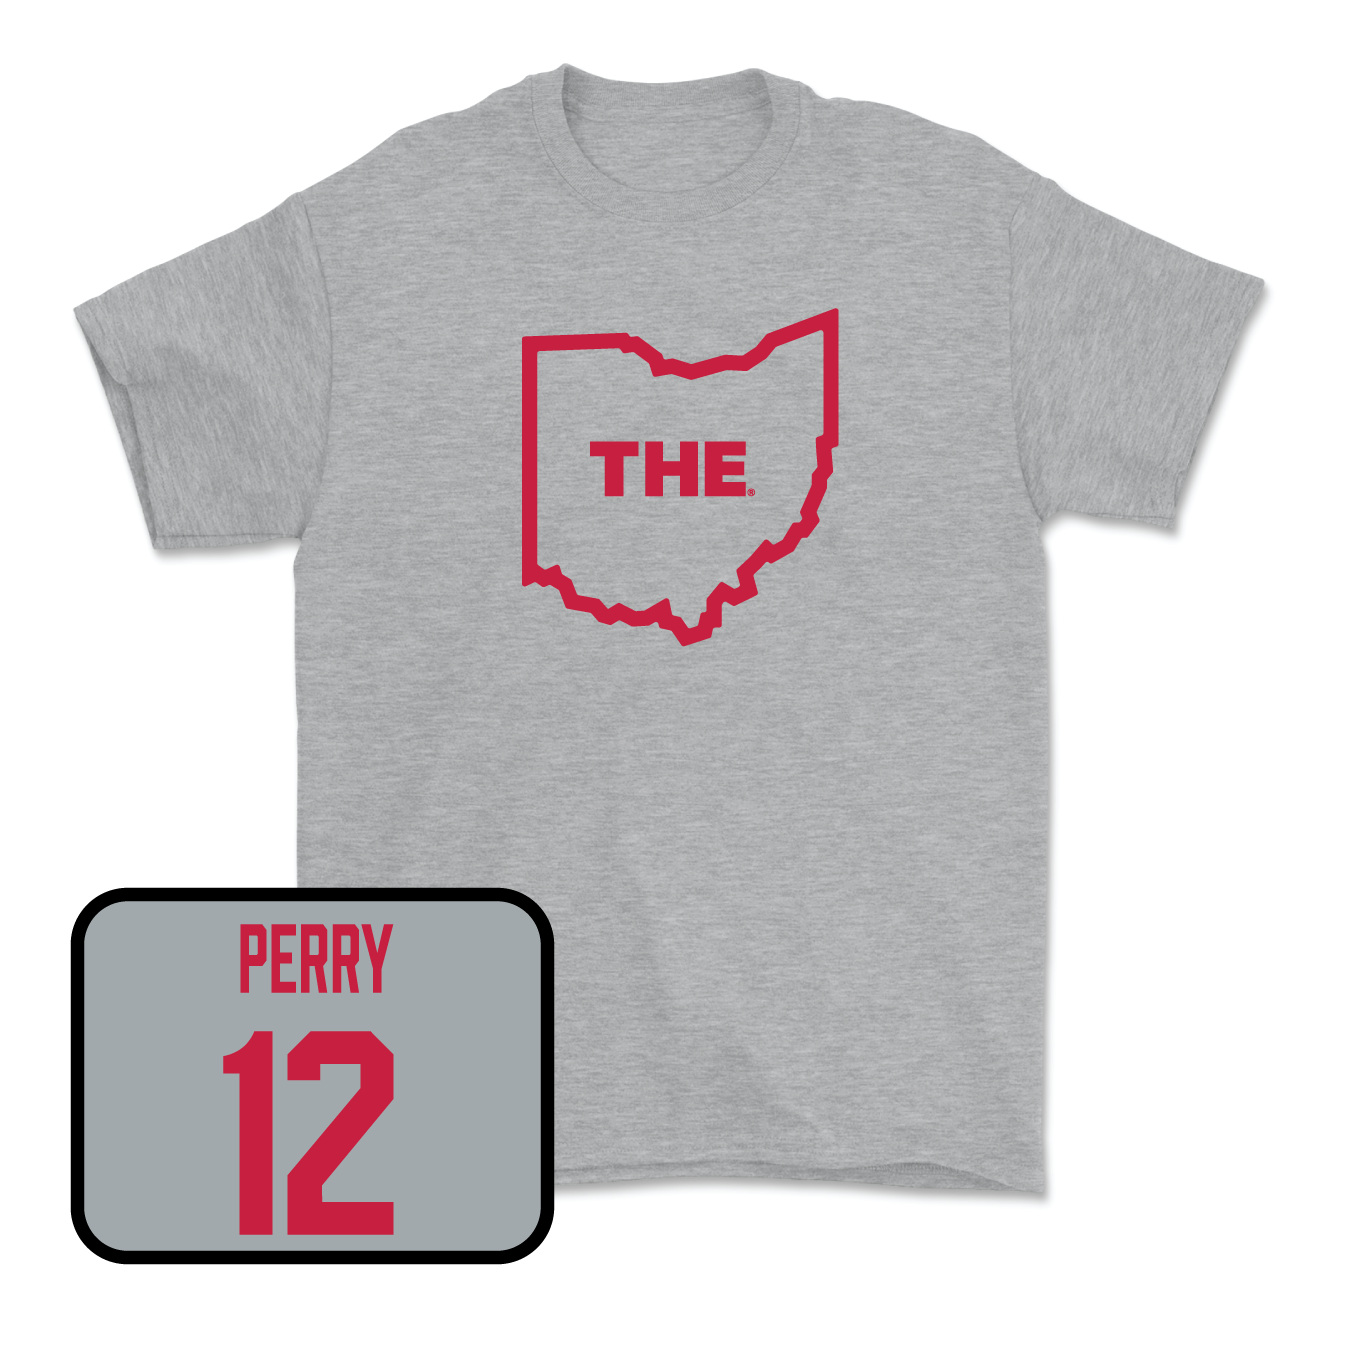 Sport Grey Women's Basketball The Tee 2 Youth Small / Mya Perry | #12